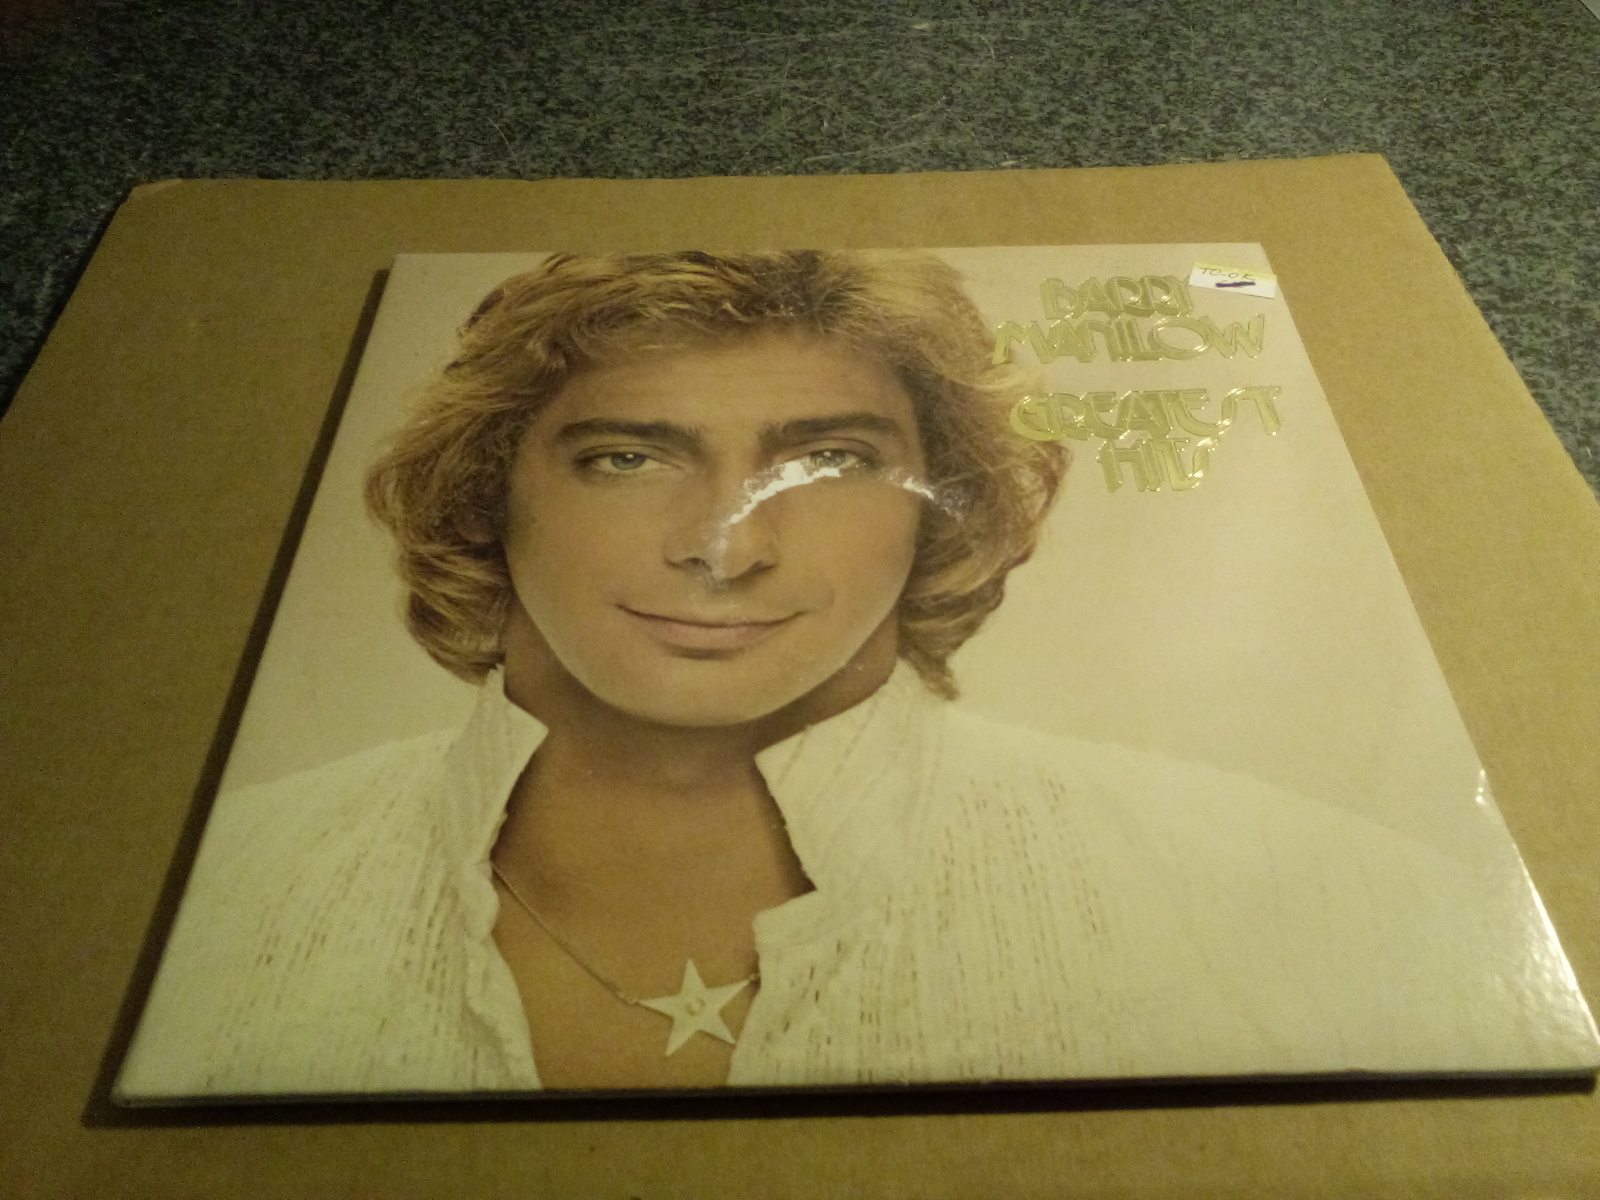 Primary image for BARRY MANILOW " GREASTEST HITS " LP